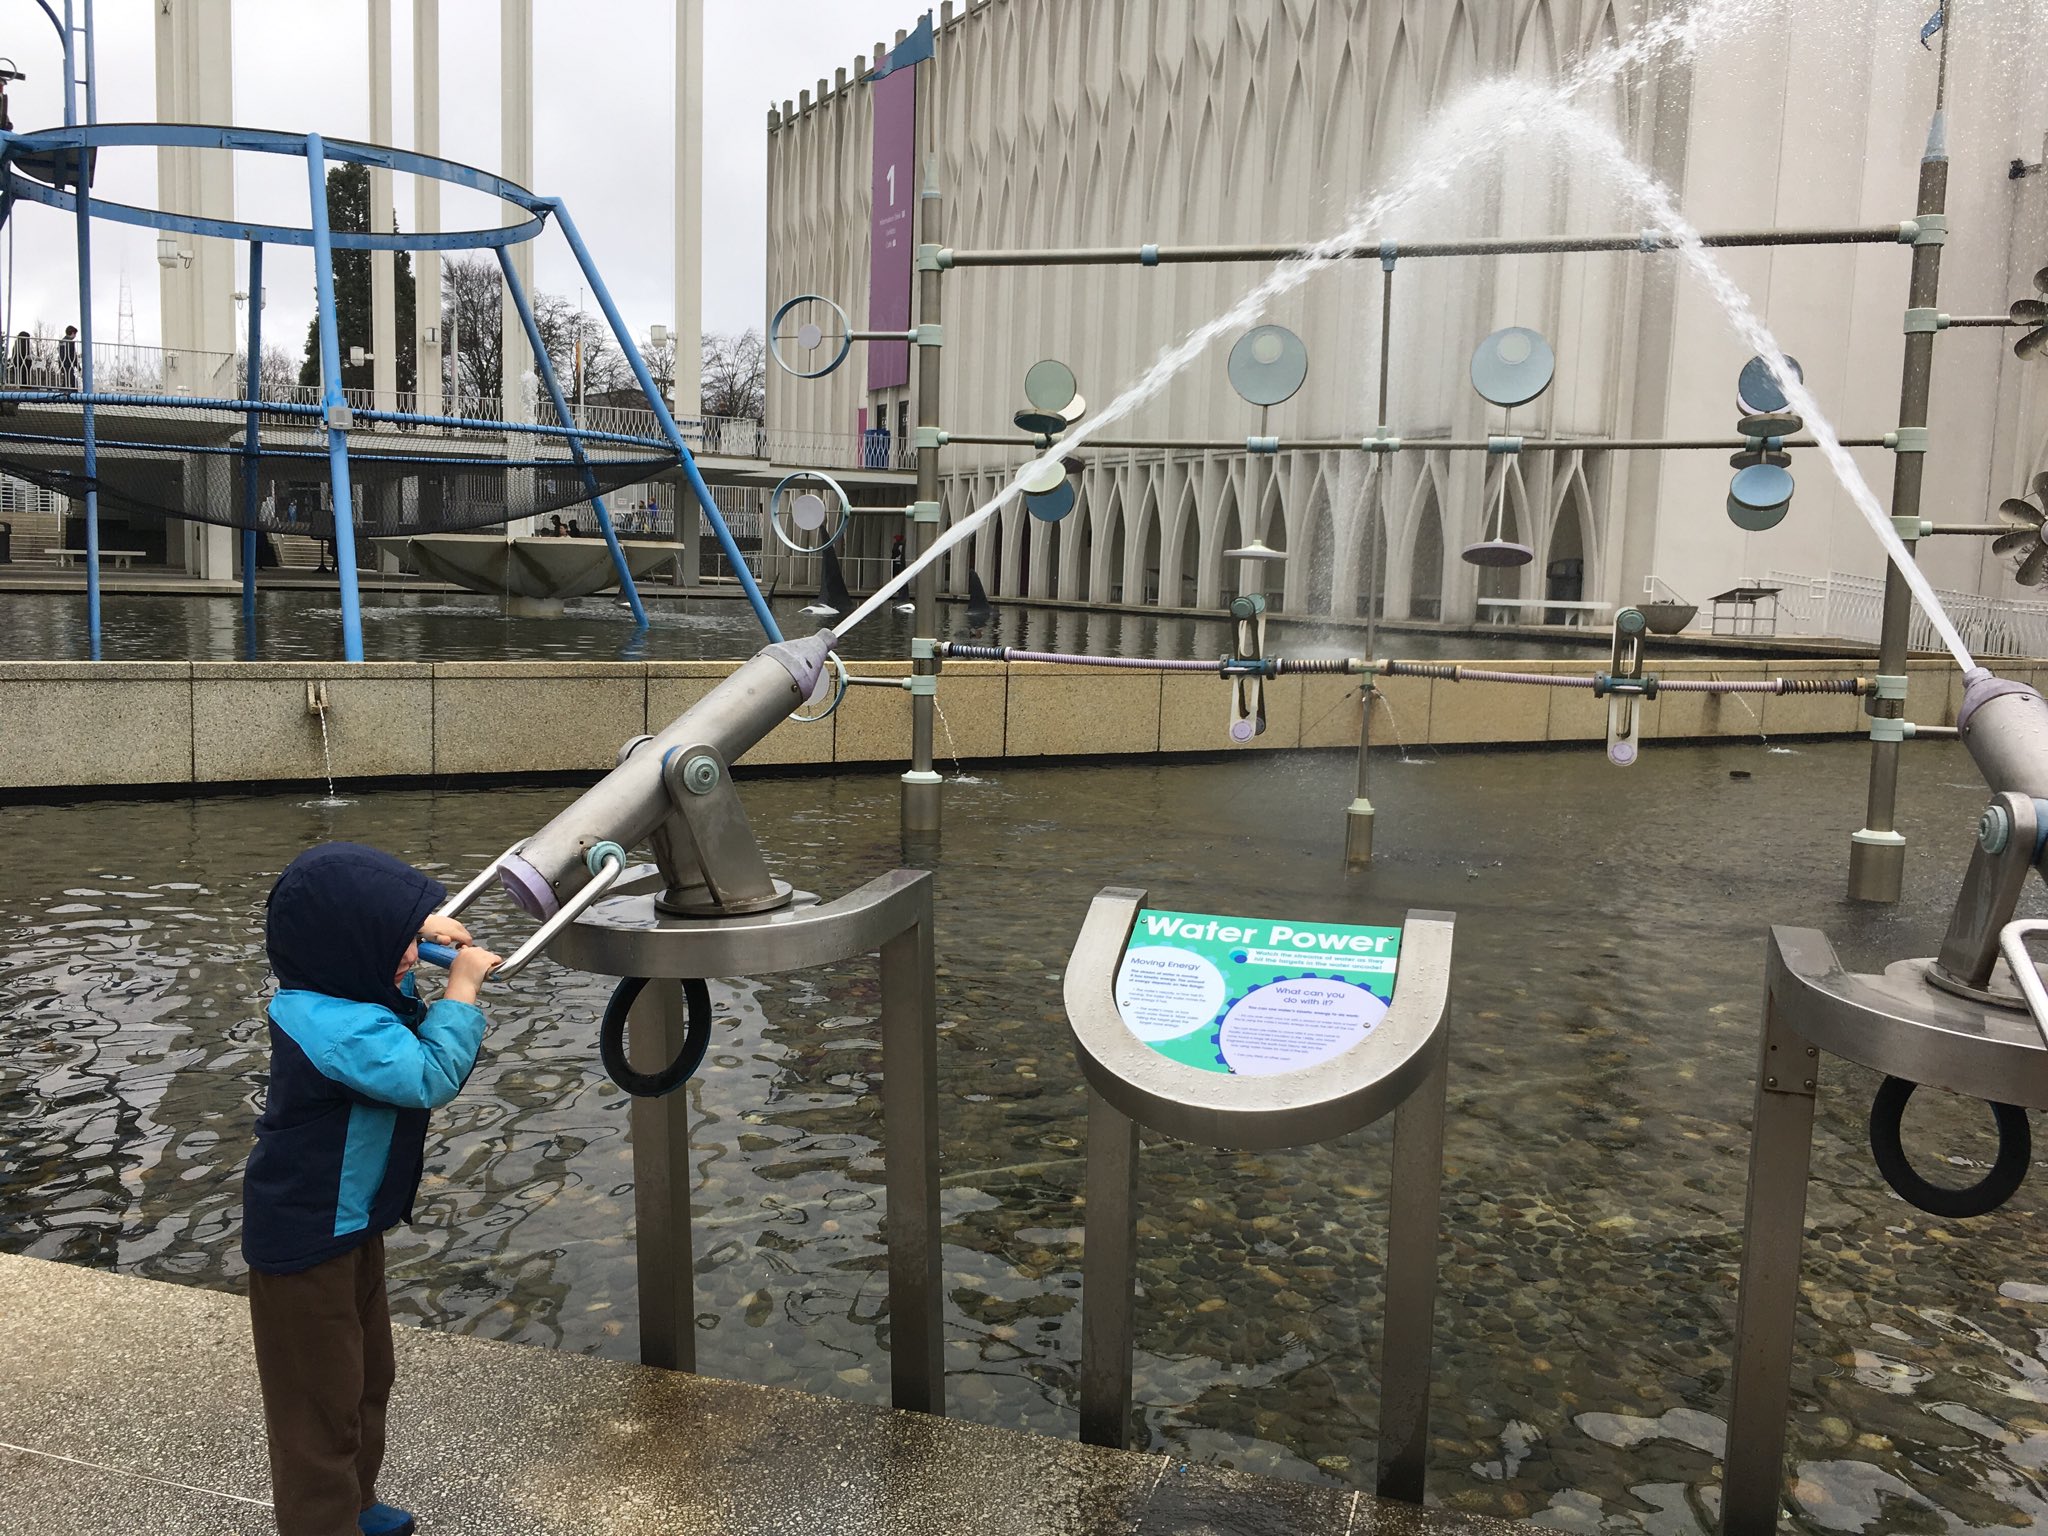 Julian aiming a water canon across the artificial pond at the Pacific Science Center.